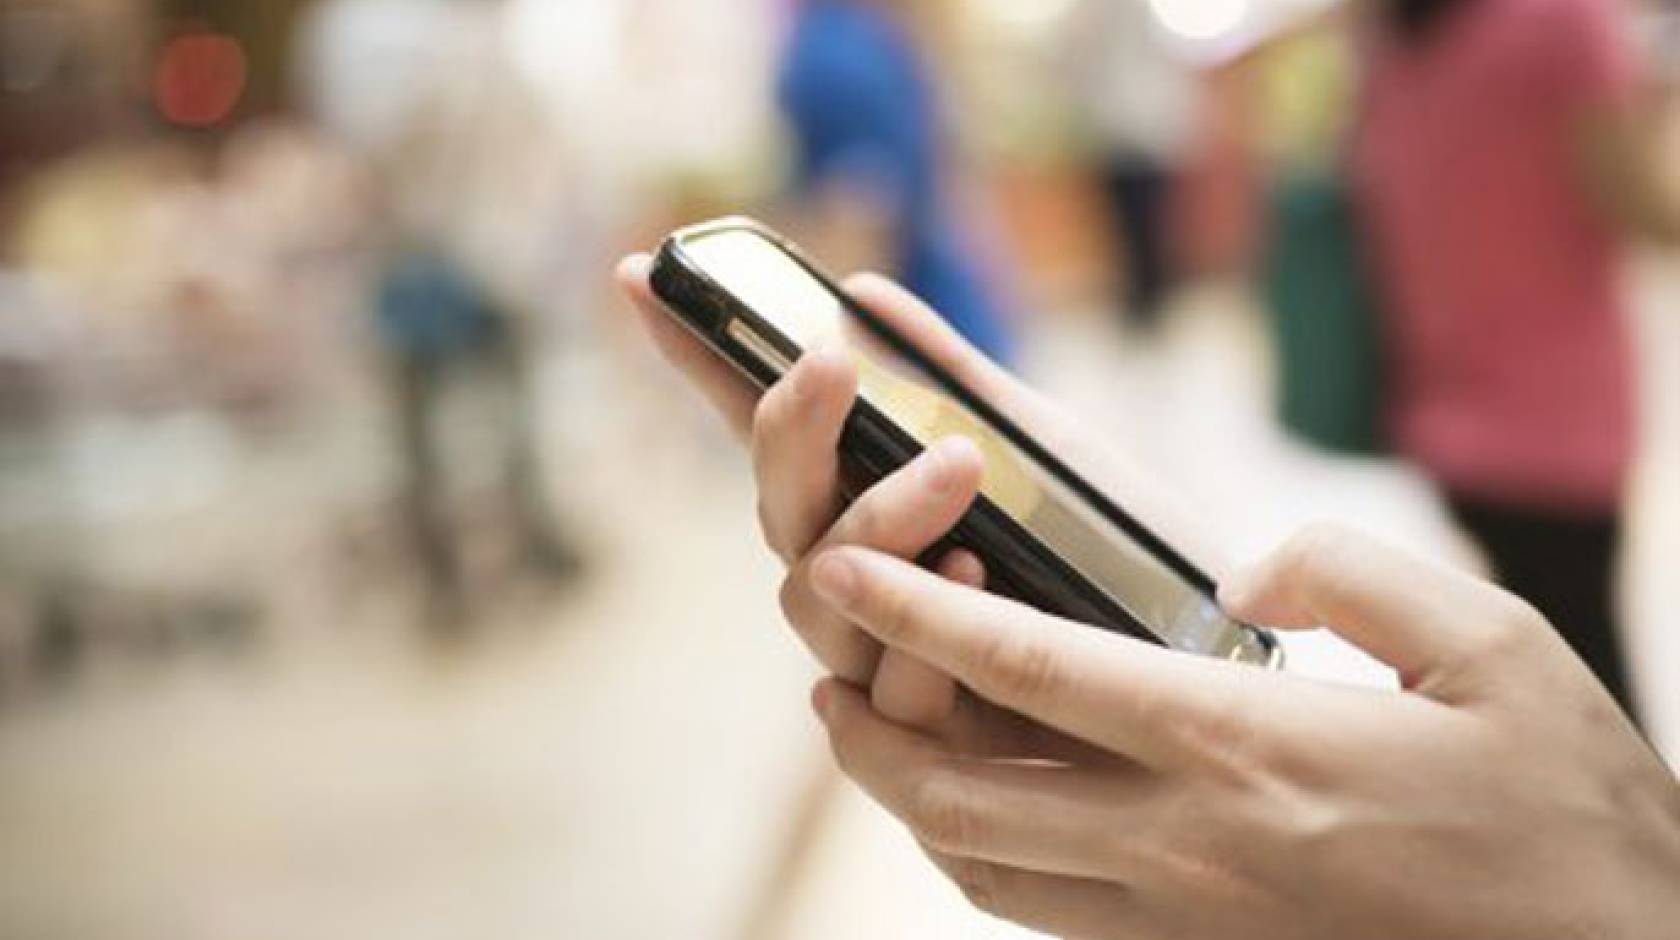 UCSF study on smartphone apps and vulnerable populations